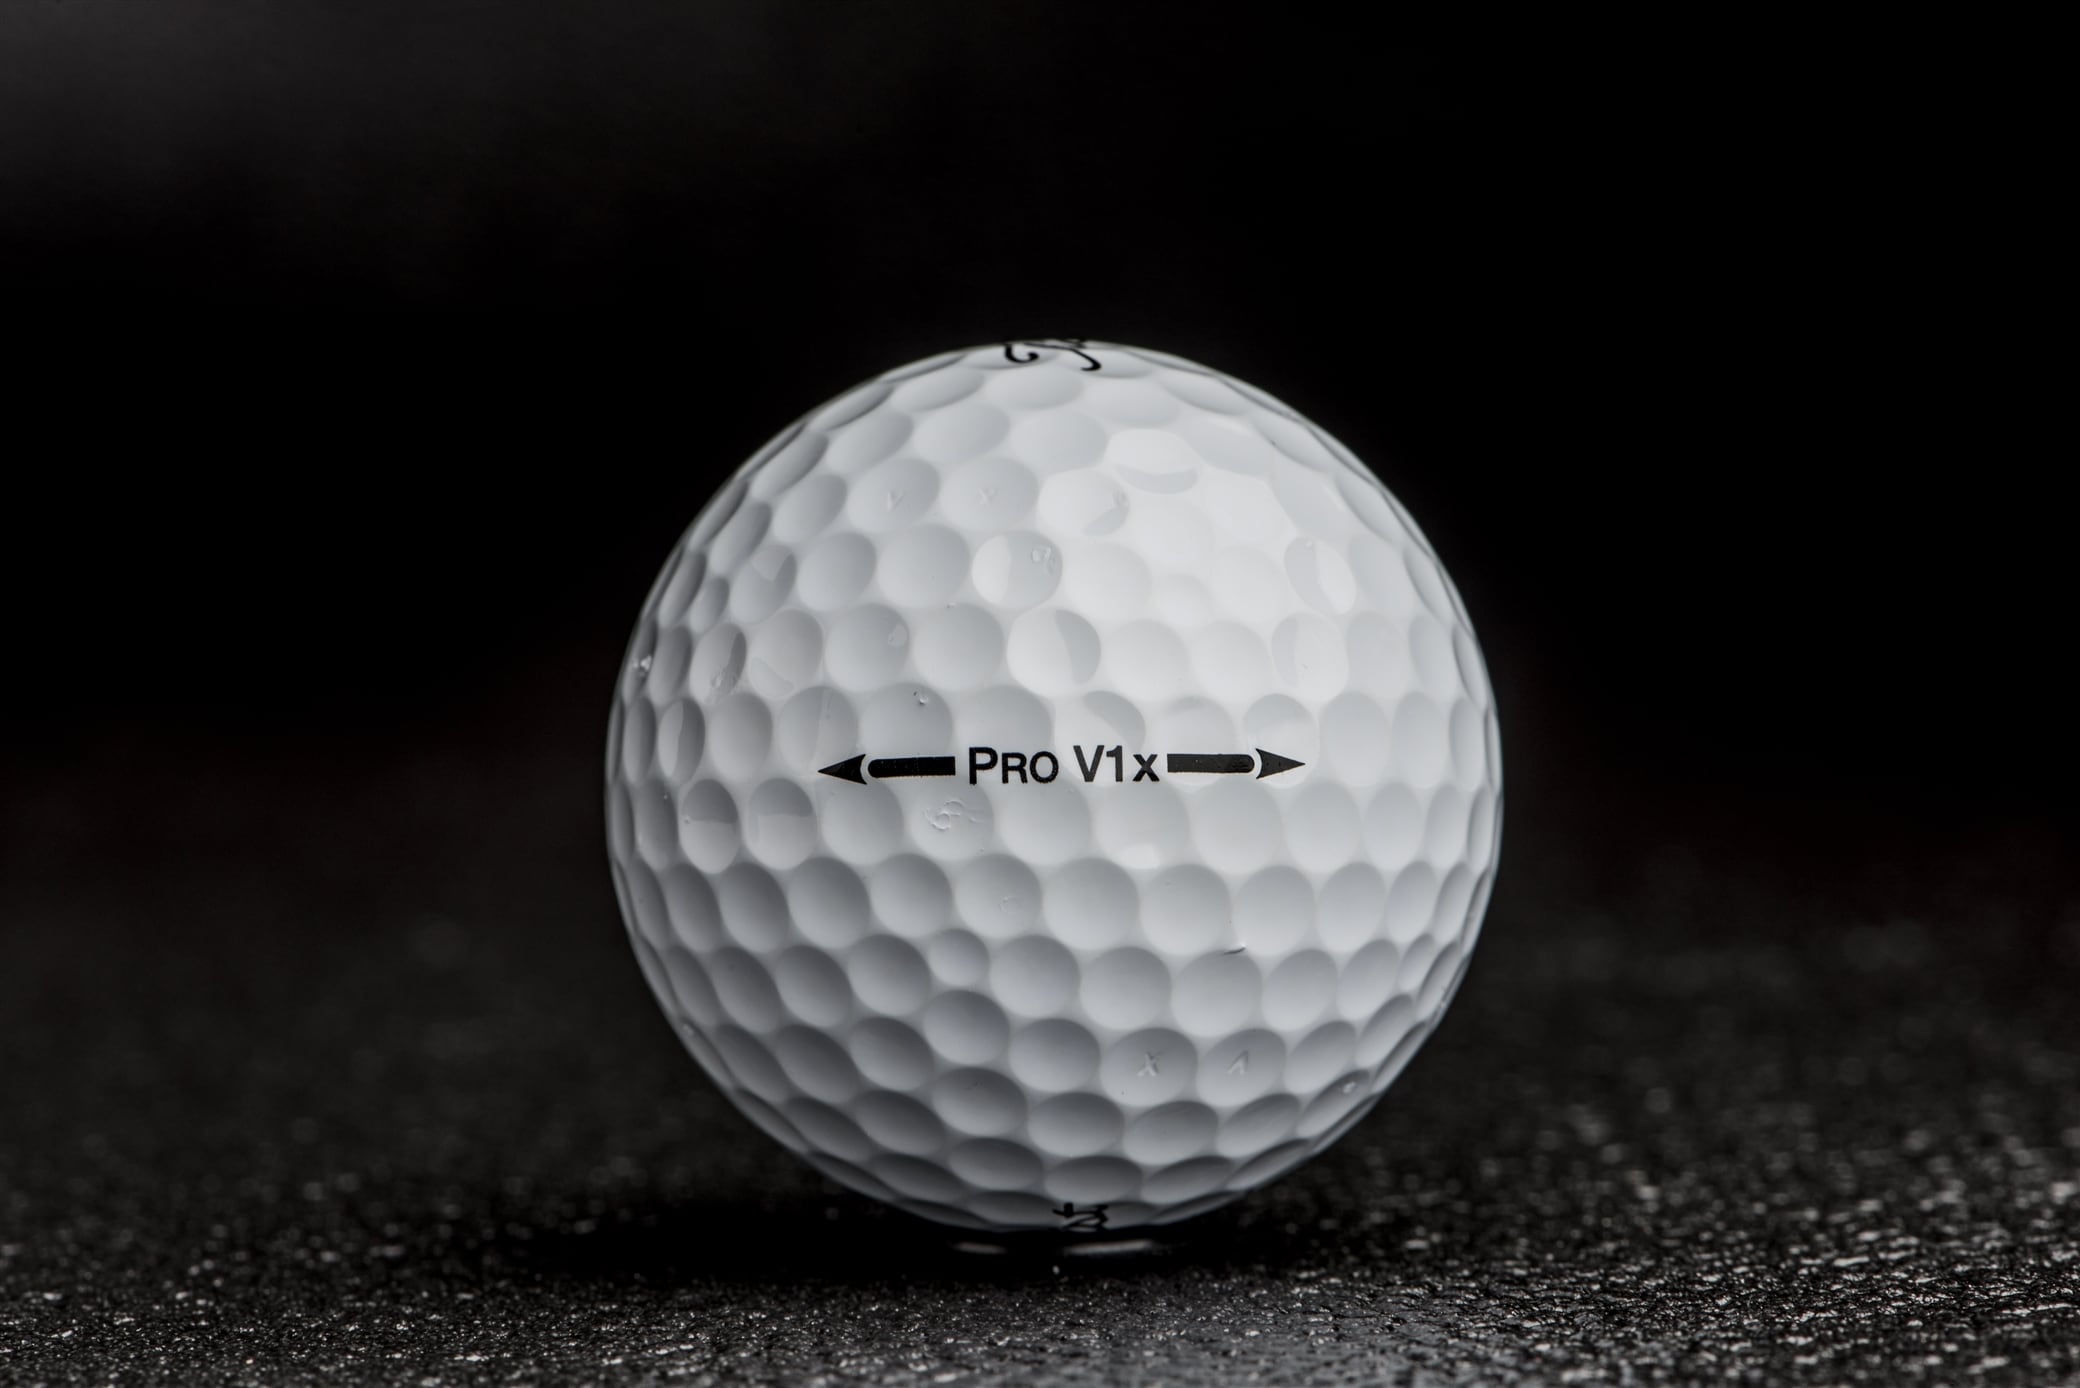 Both the 2007 Pro V1 and Pro V1x (pictured) featured Titleist's A.I.M. sidestamp advancement